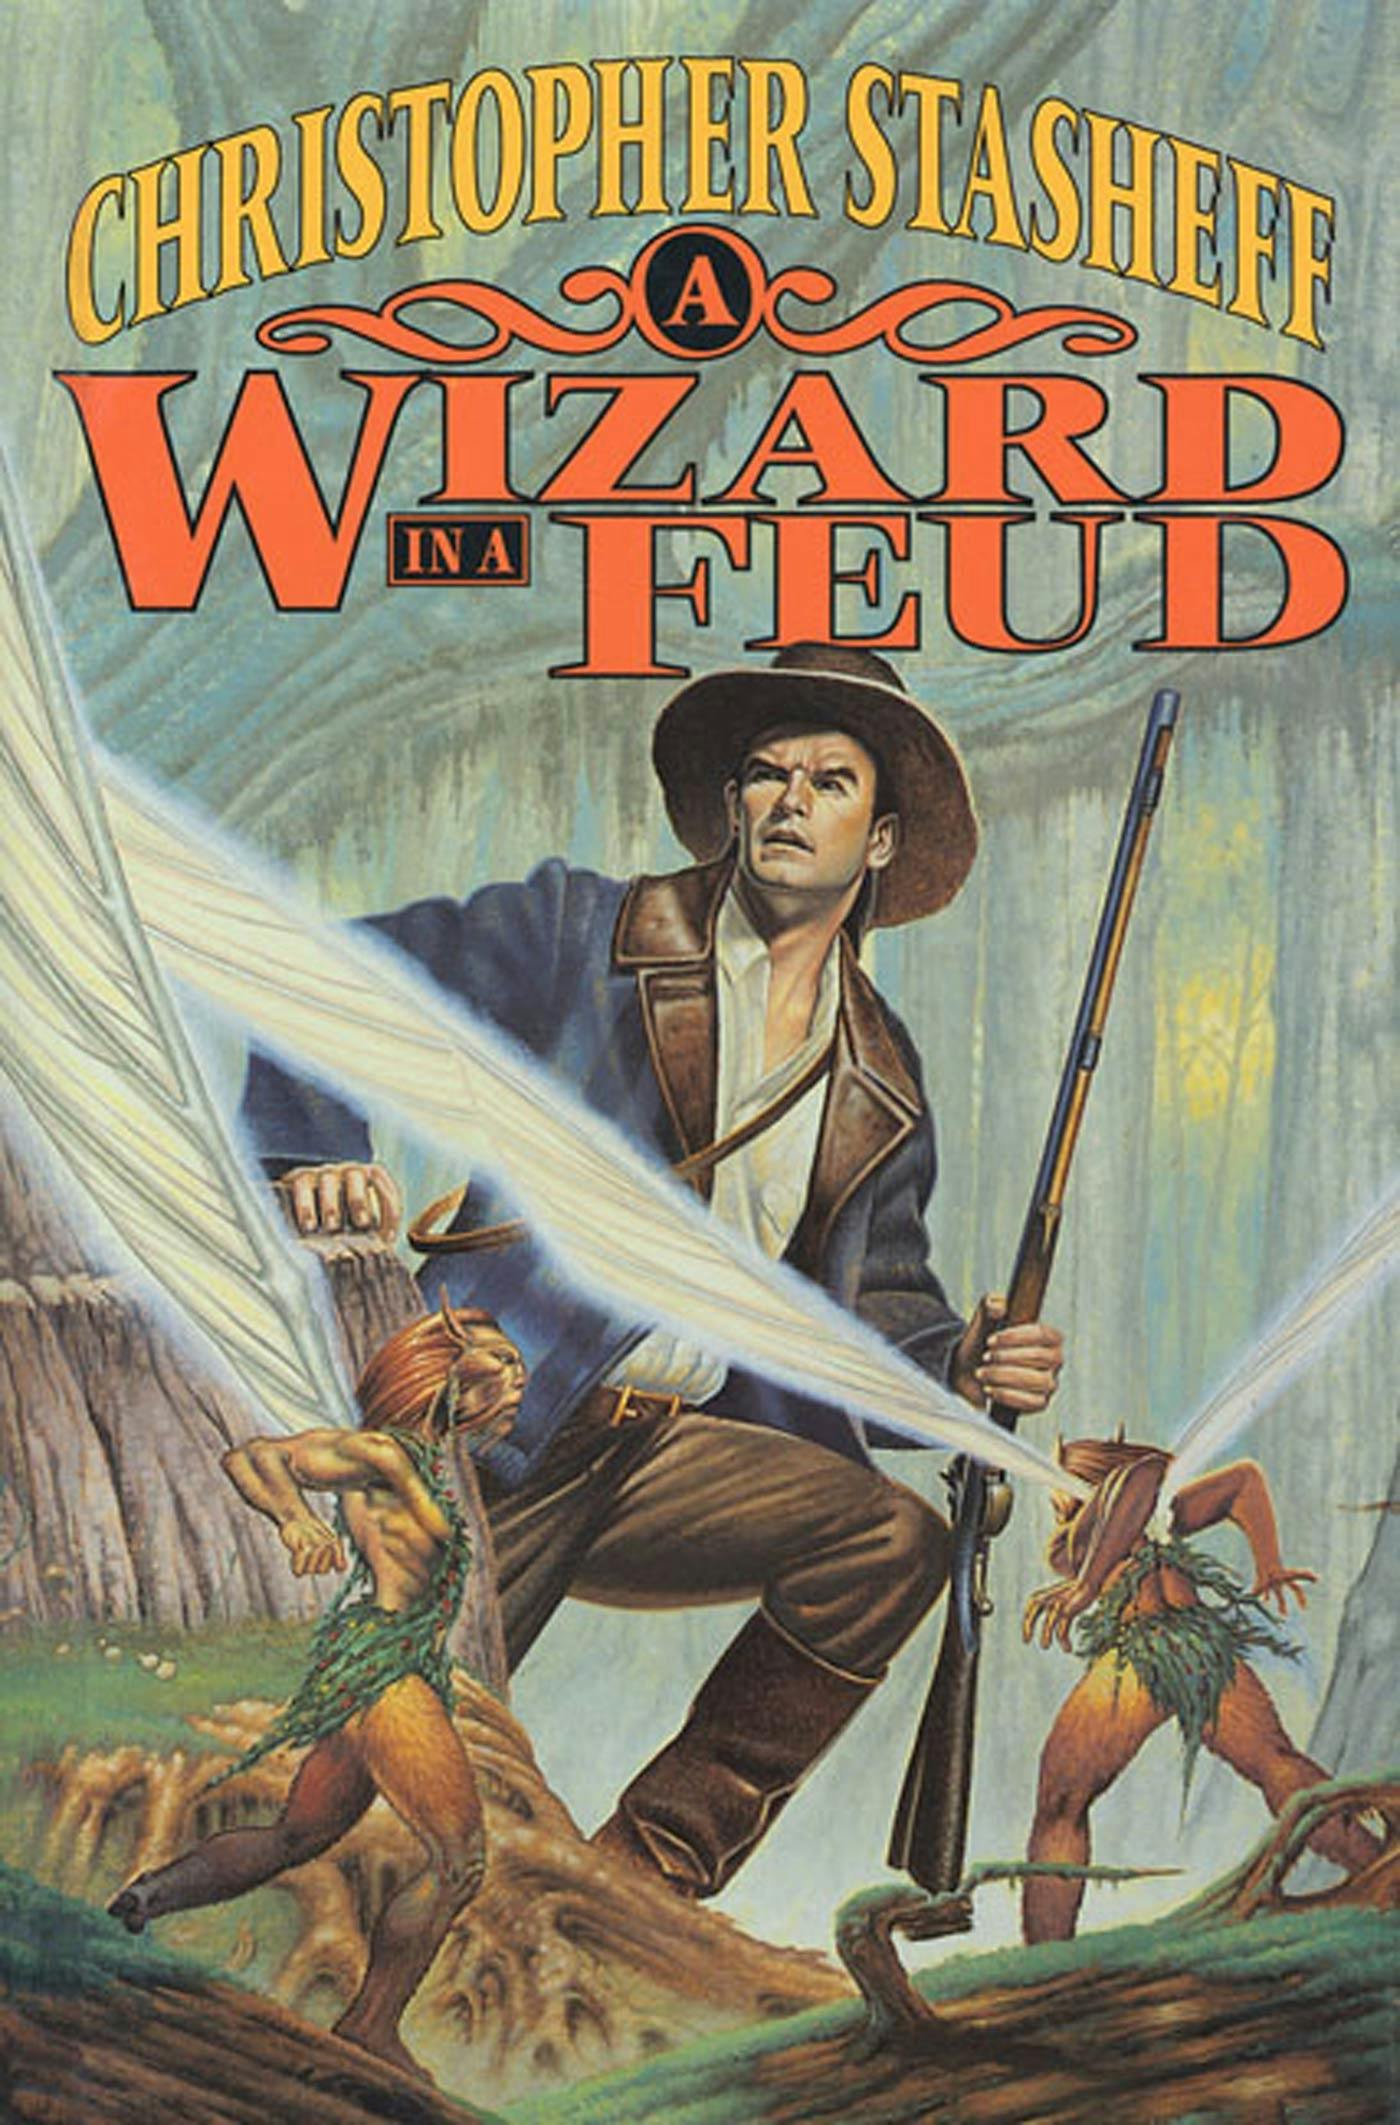 Cover for the book titled as: A Wizard In A Feud